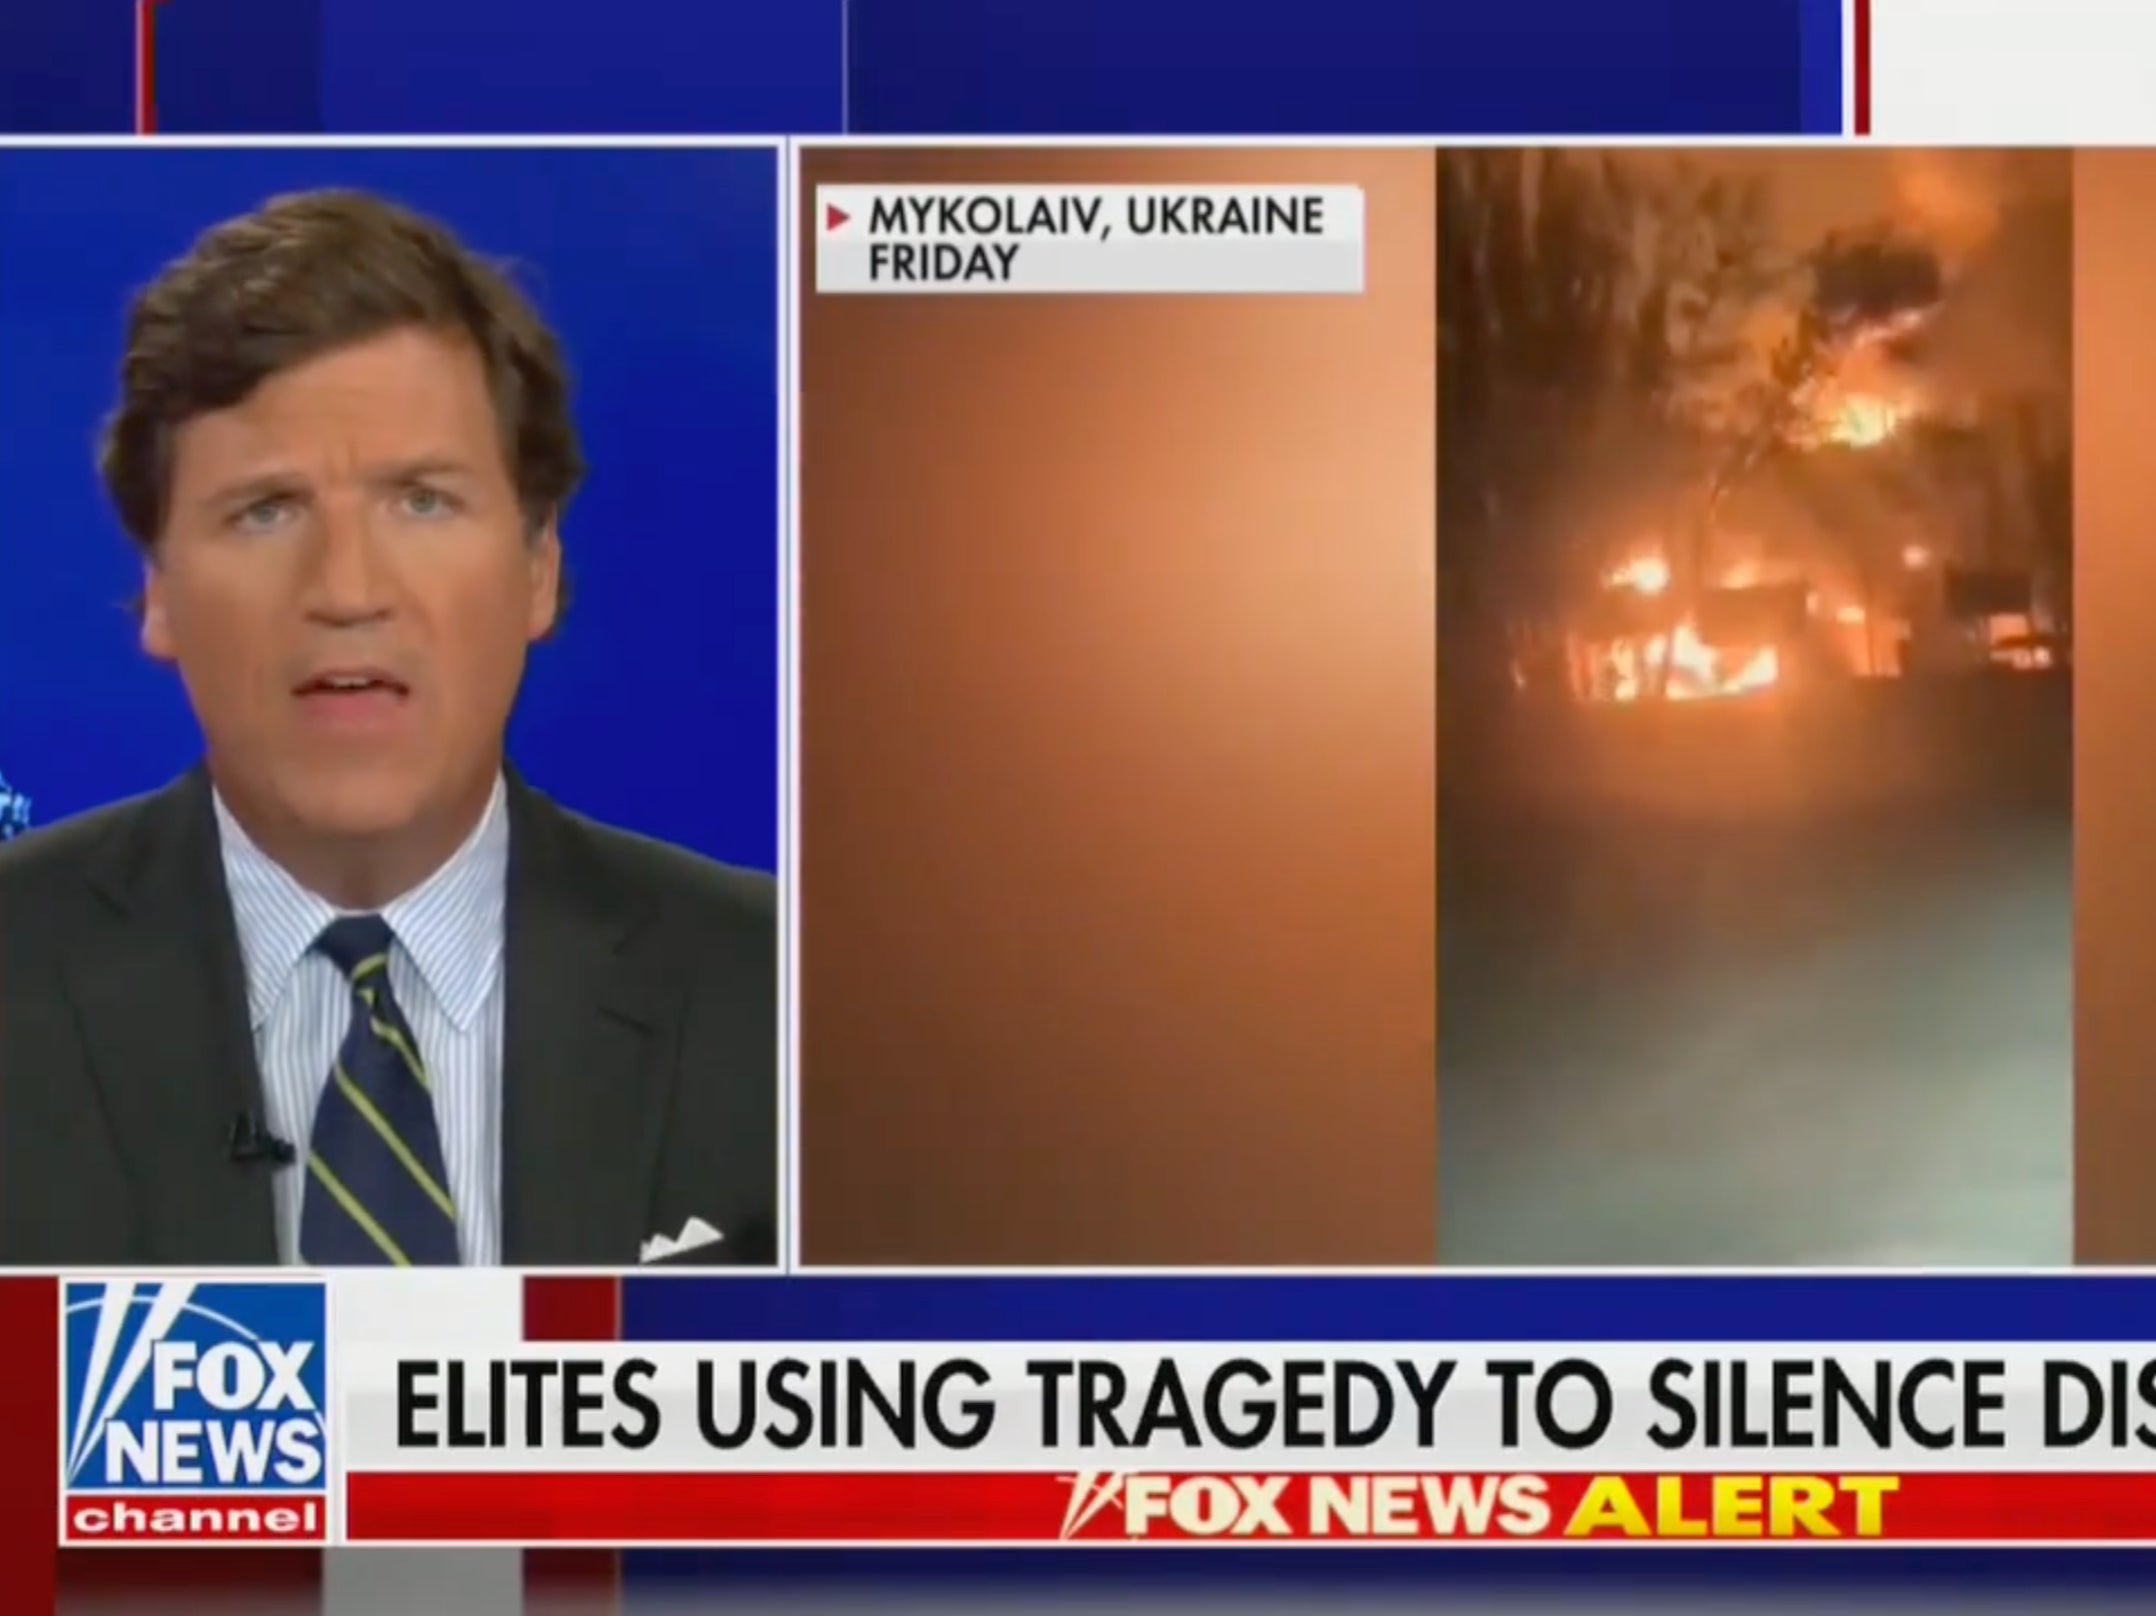 Tucker Carlson claimed ‘elites’ and US allies of censoring ‘opinion’ on Ukraine war